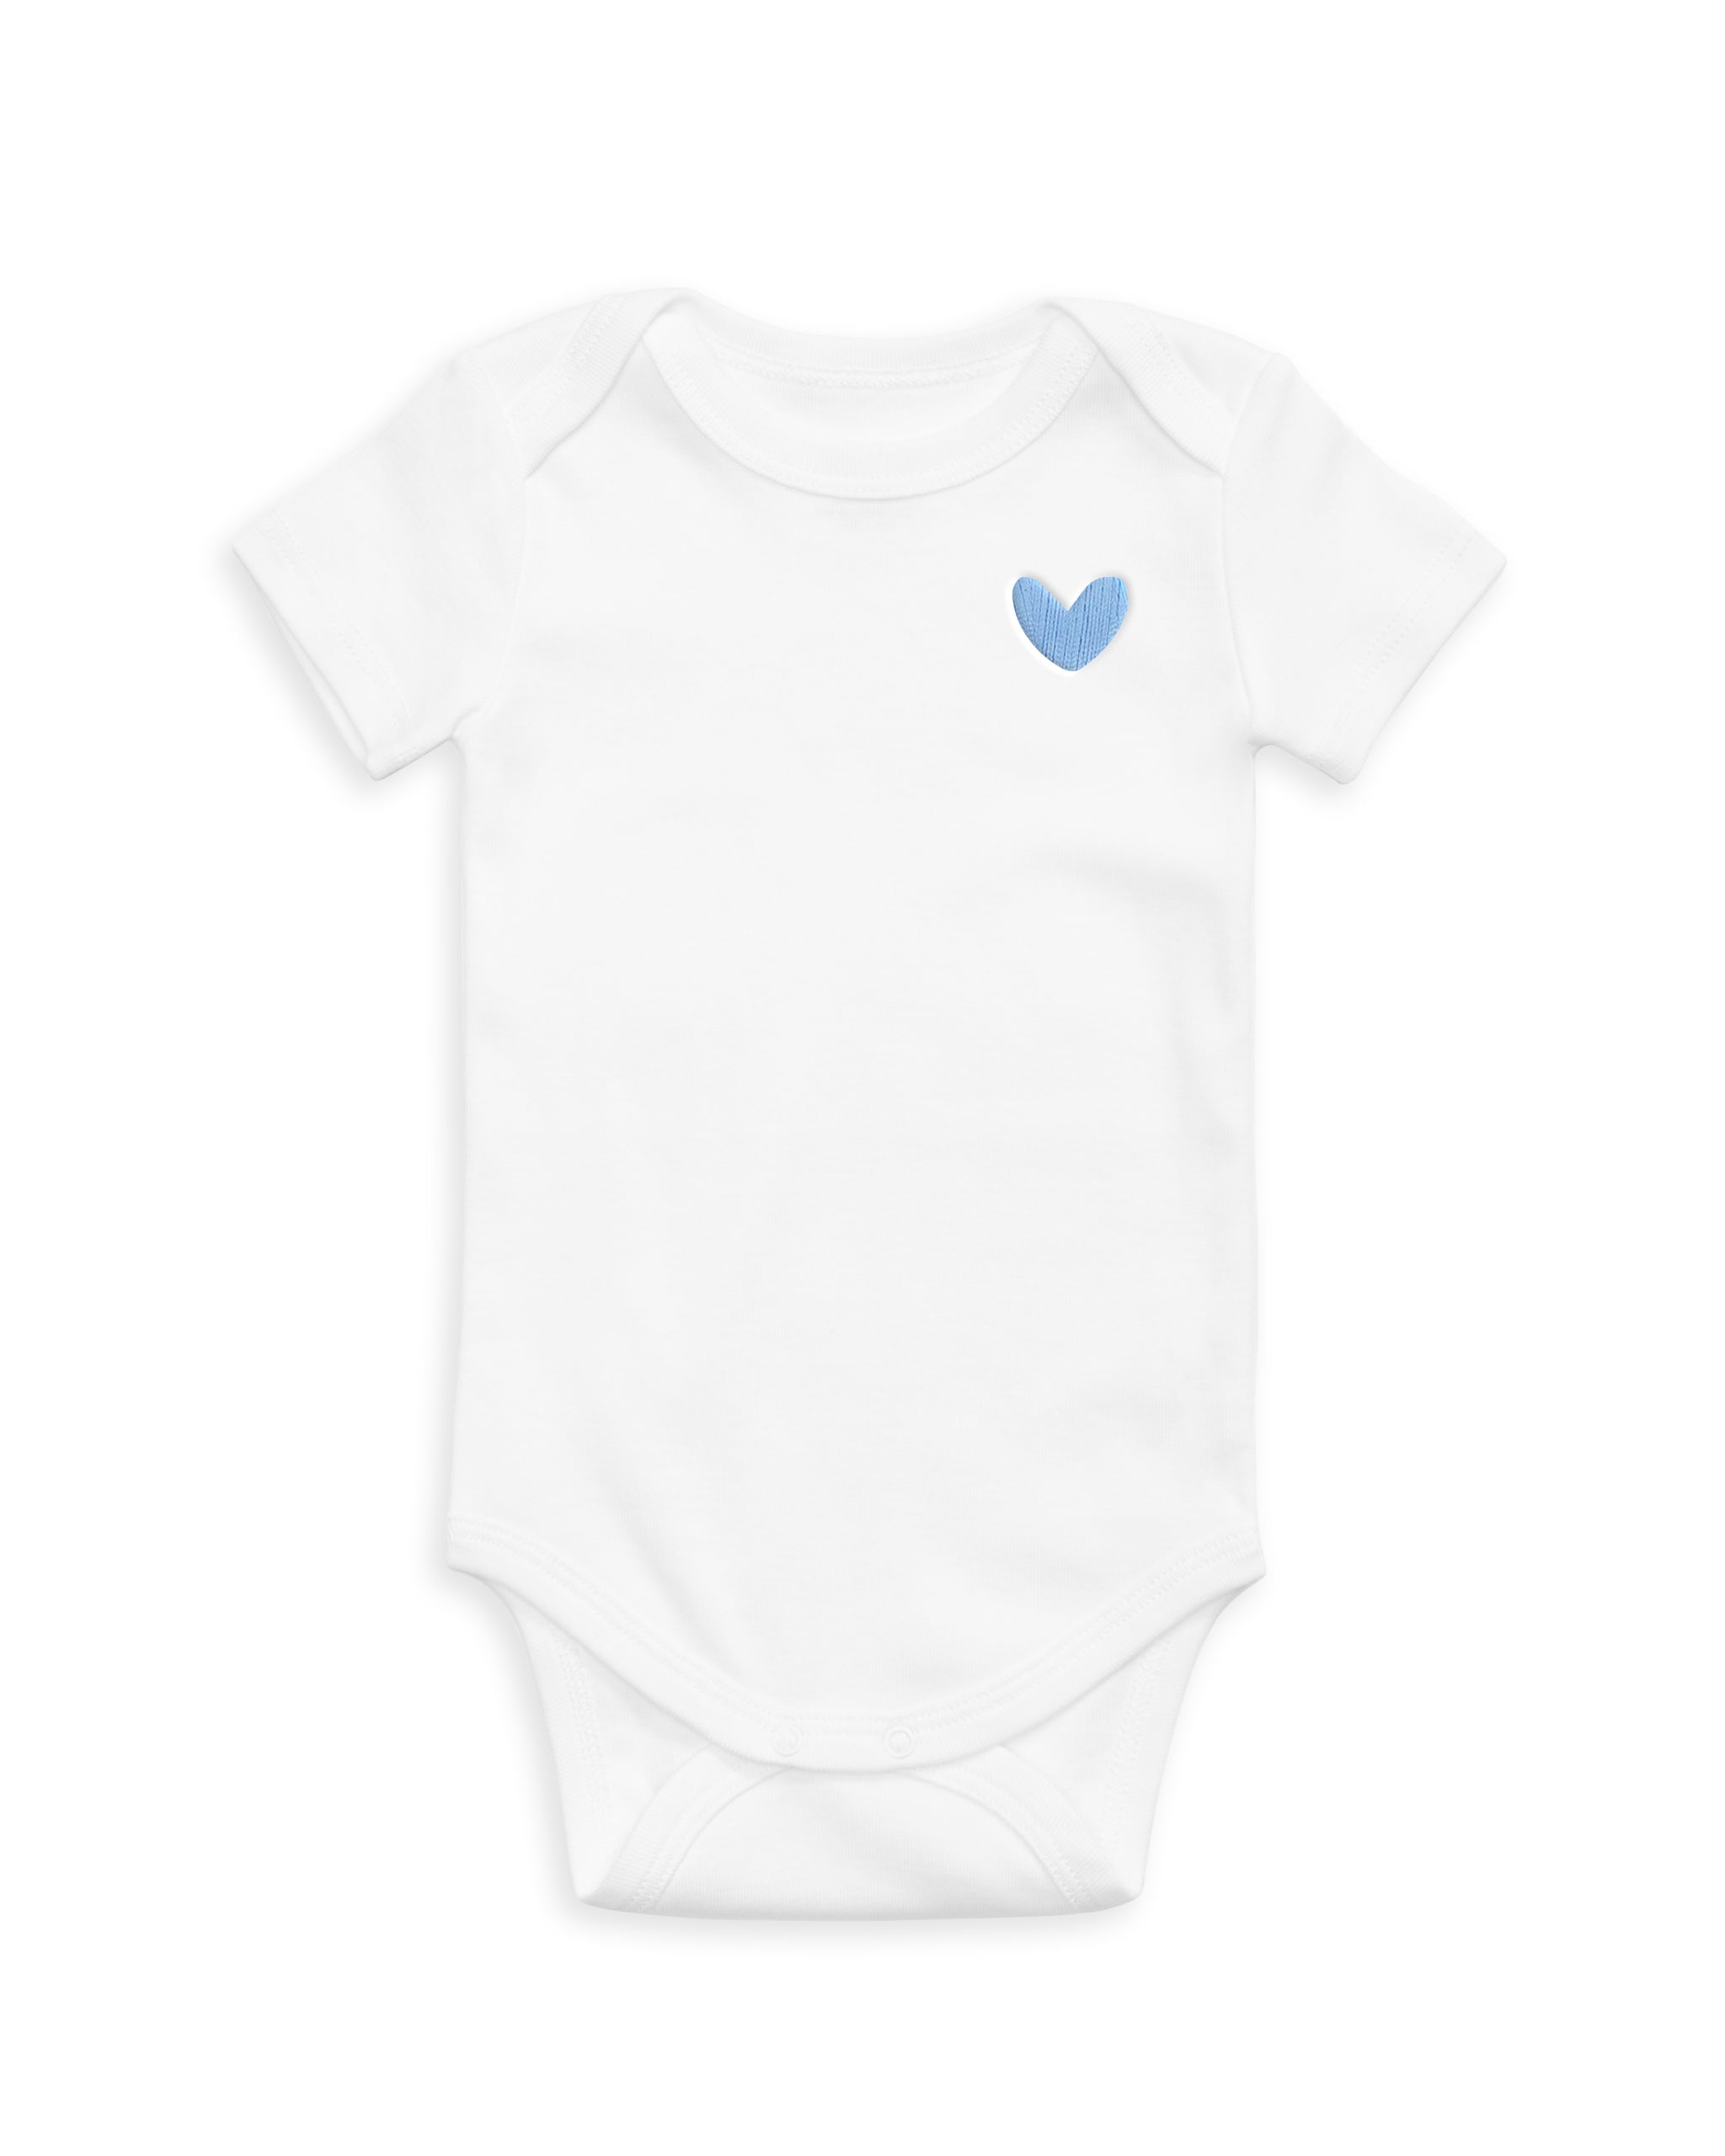 The Organic Embroidered Short Sleeve Onesie [White with Blue Heart]